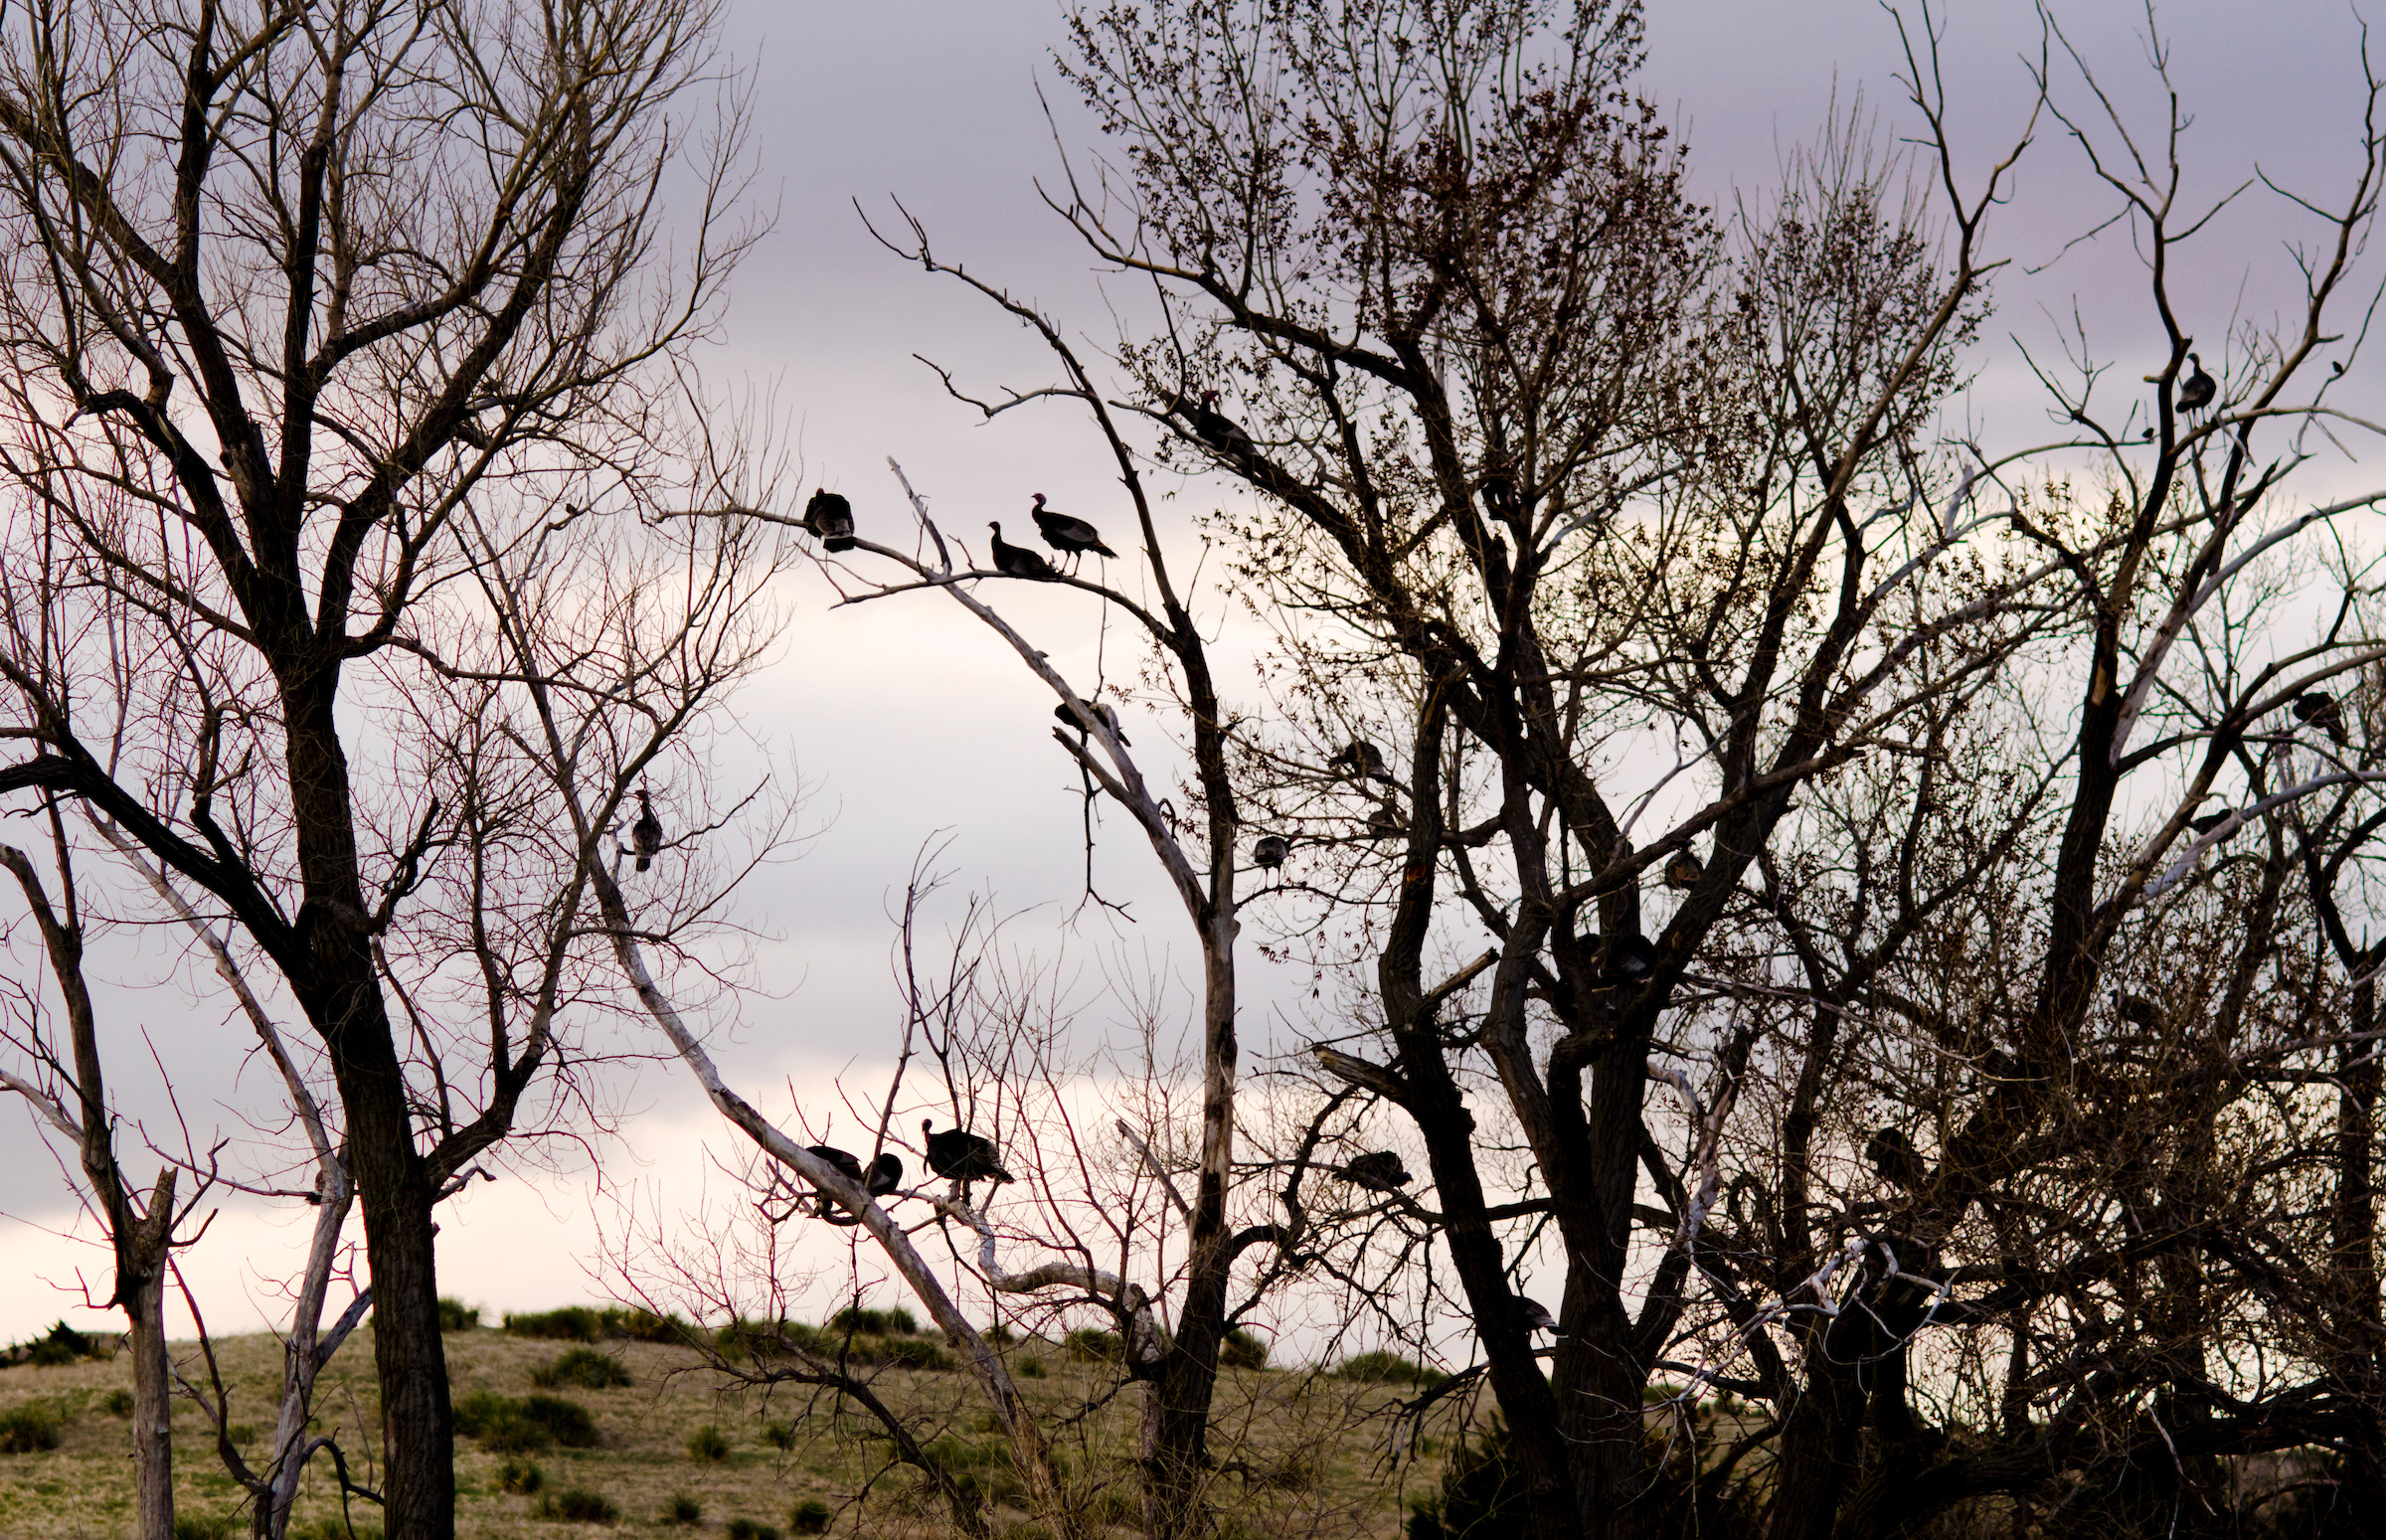 A flock of turkeys on the roost.